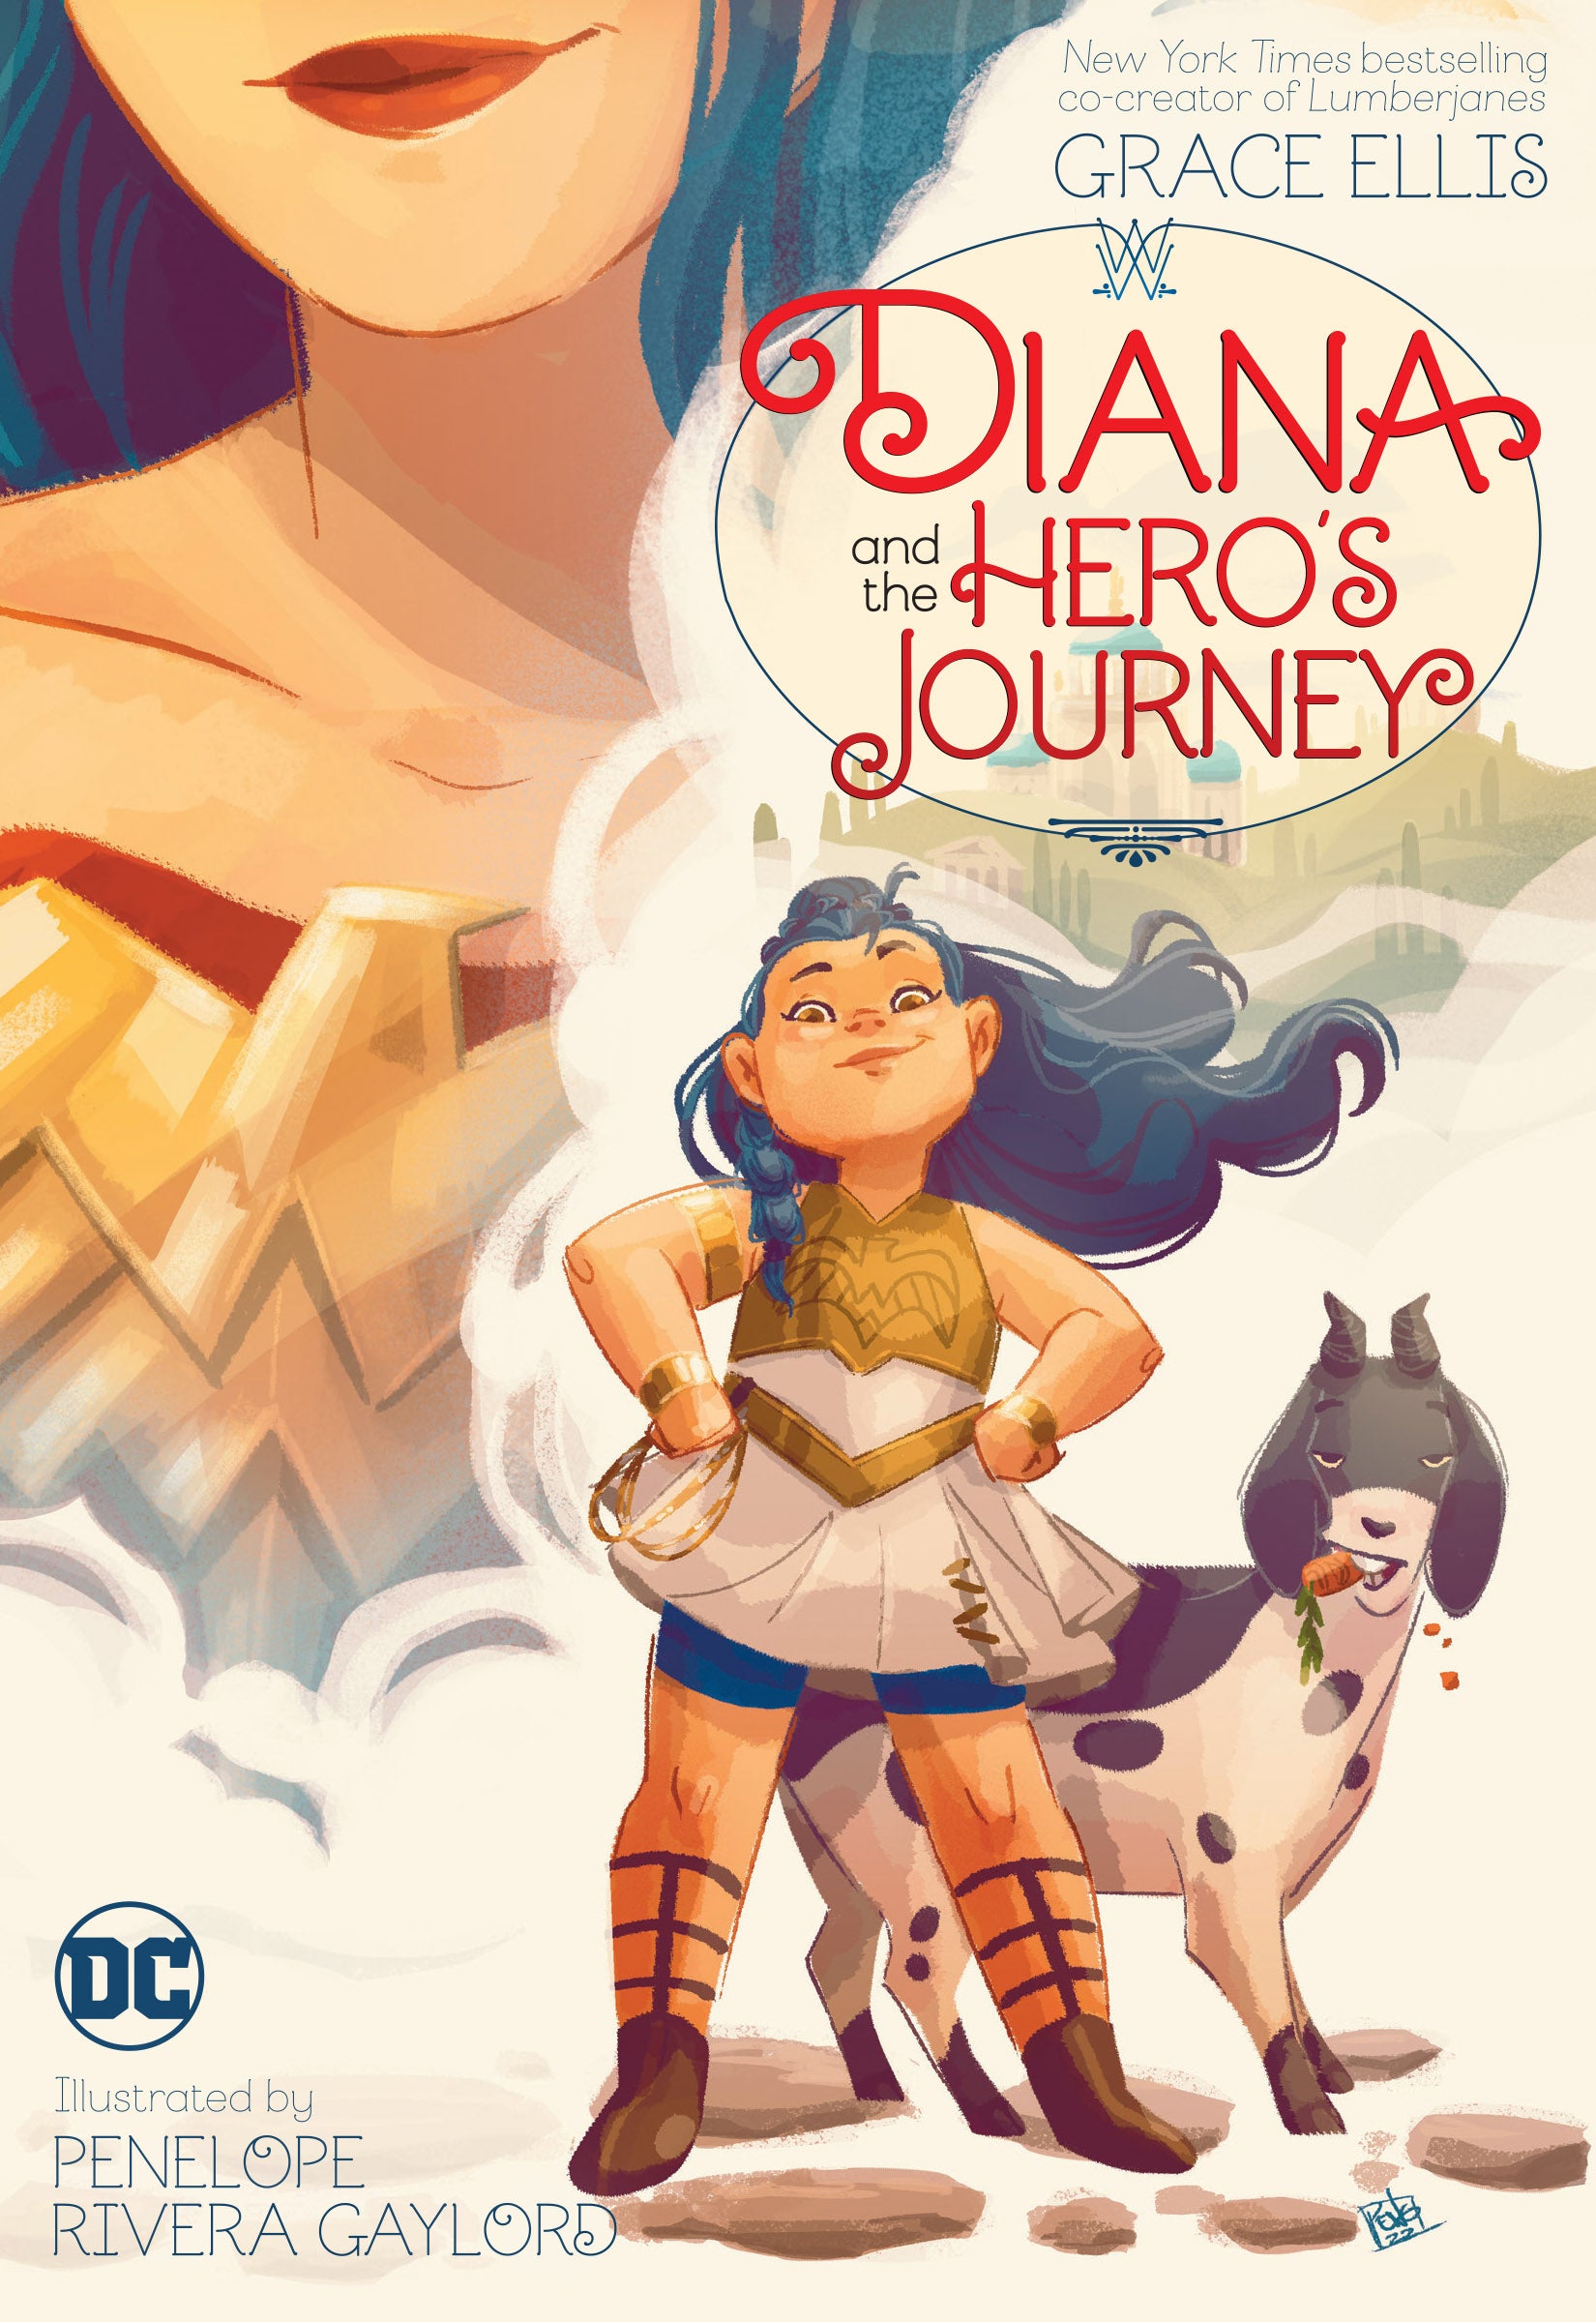 DIANA AND THE HEROS JOURNEY TRADE PAPERBACK